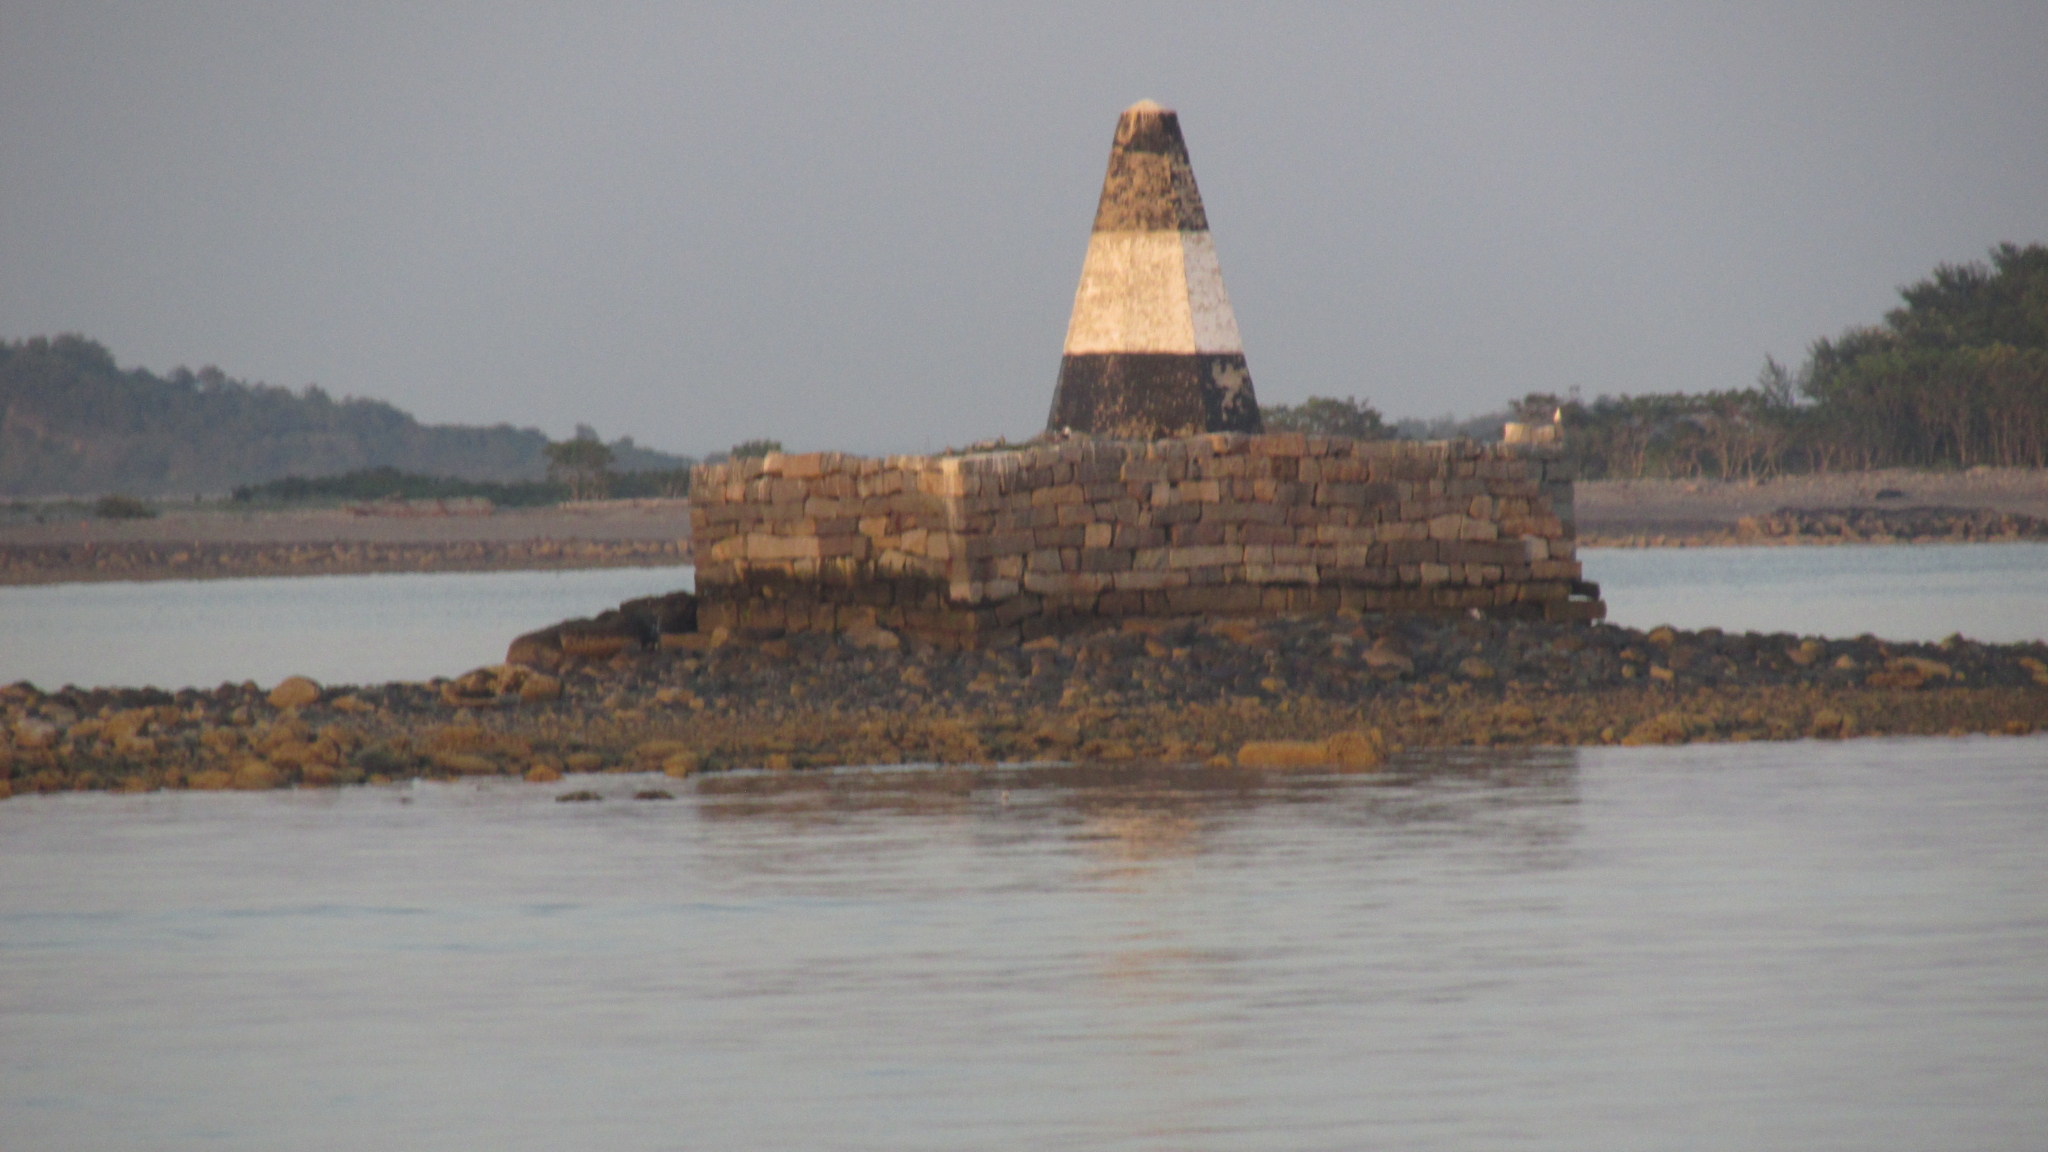 A modern archeological structure – a stationary channel marker built upon a shoal left behind by glacial debris.